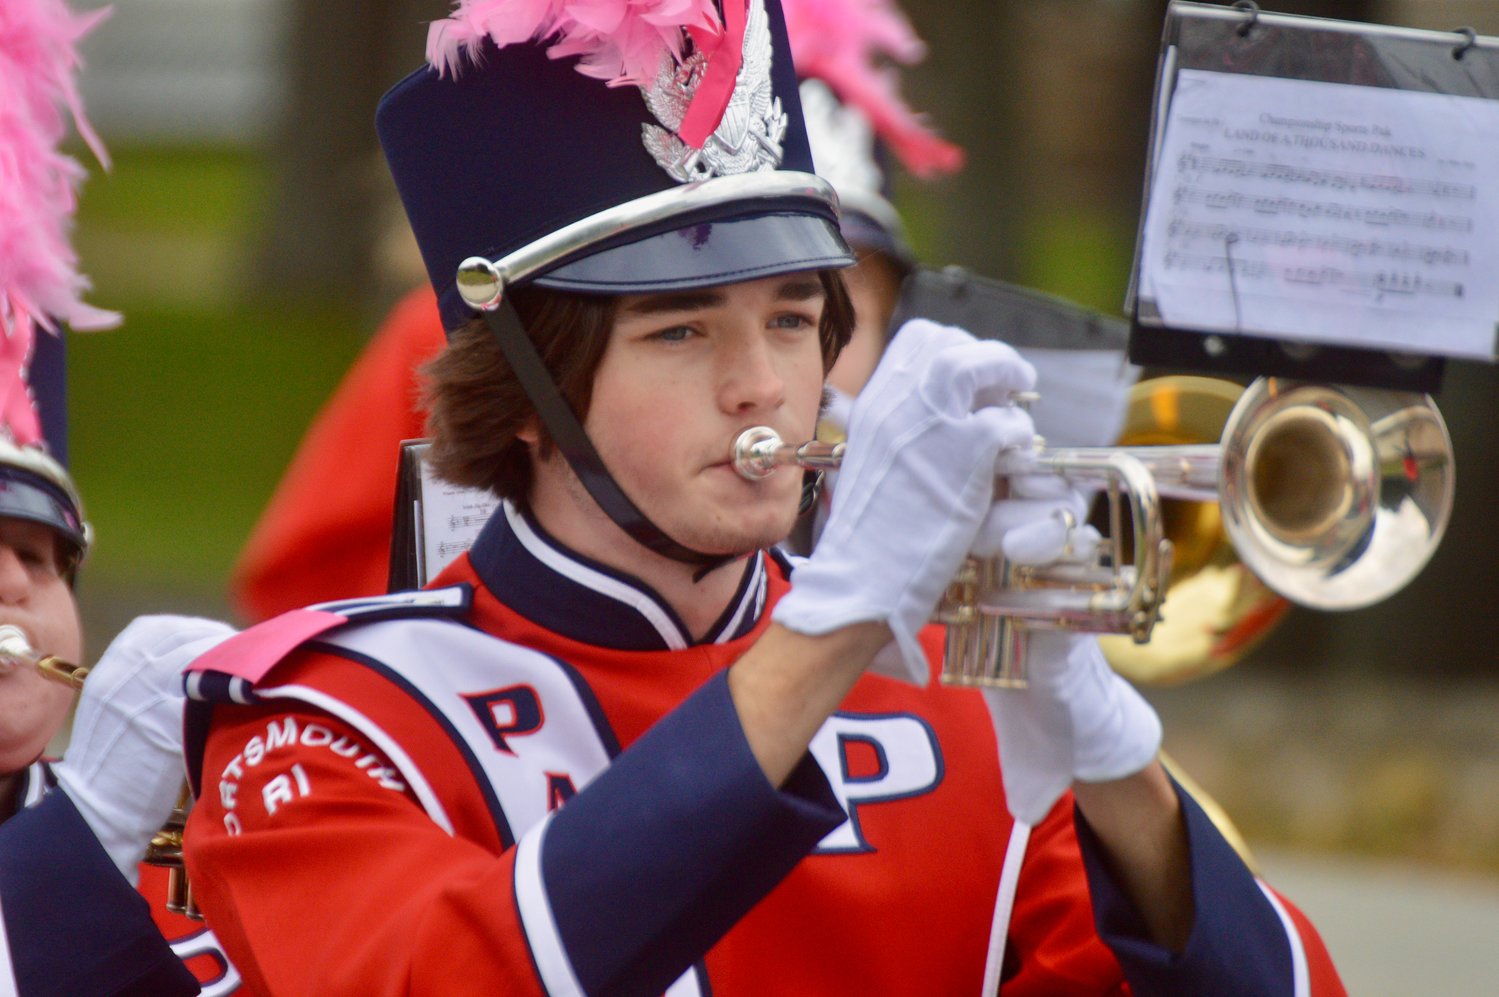 Garrett Kemper performs a tune with the PHS Marching Band during the Homecoming parade.